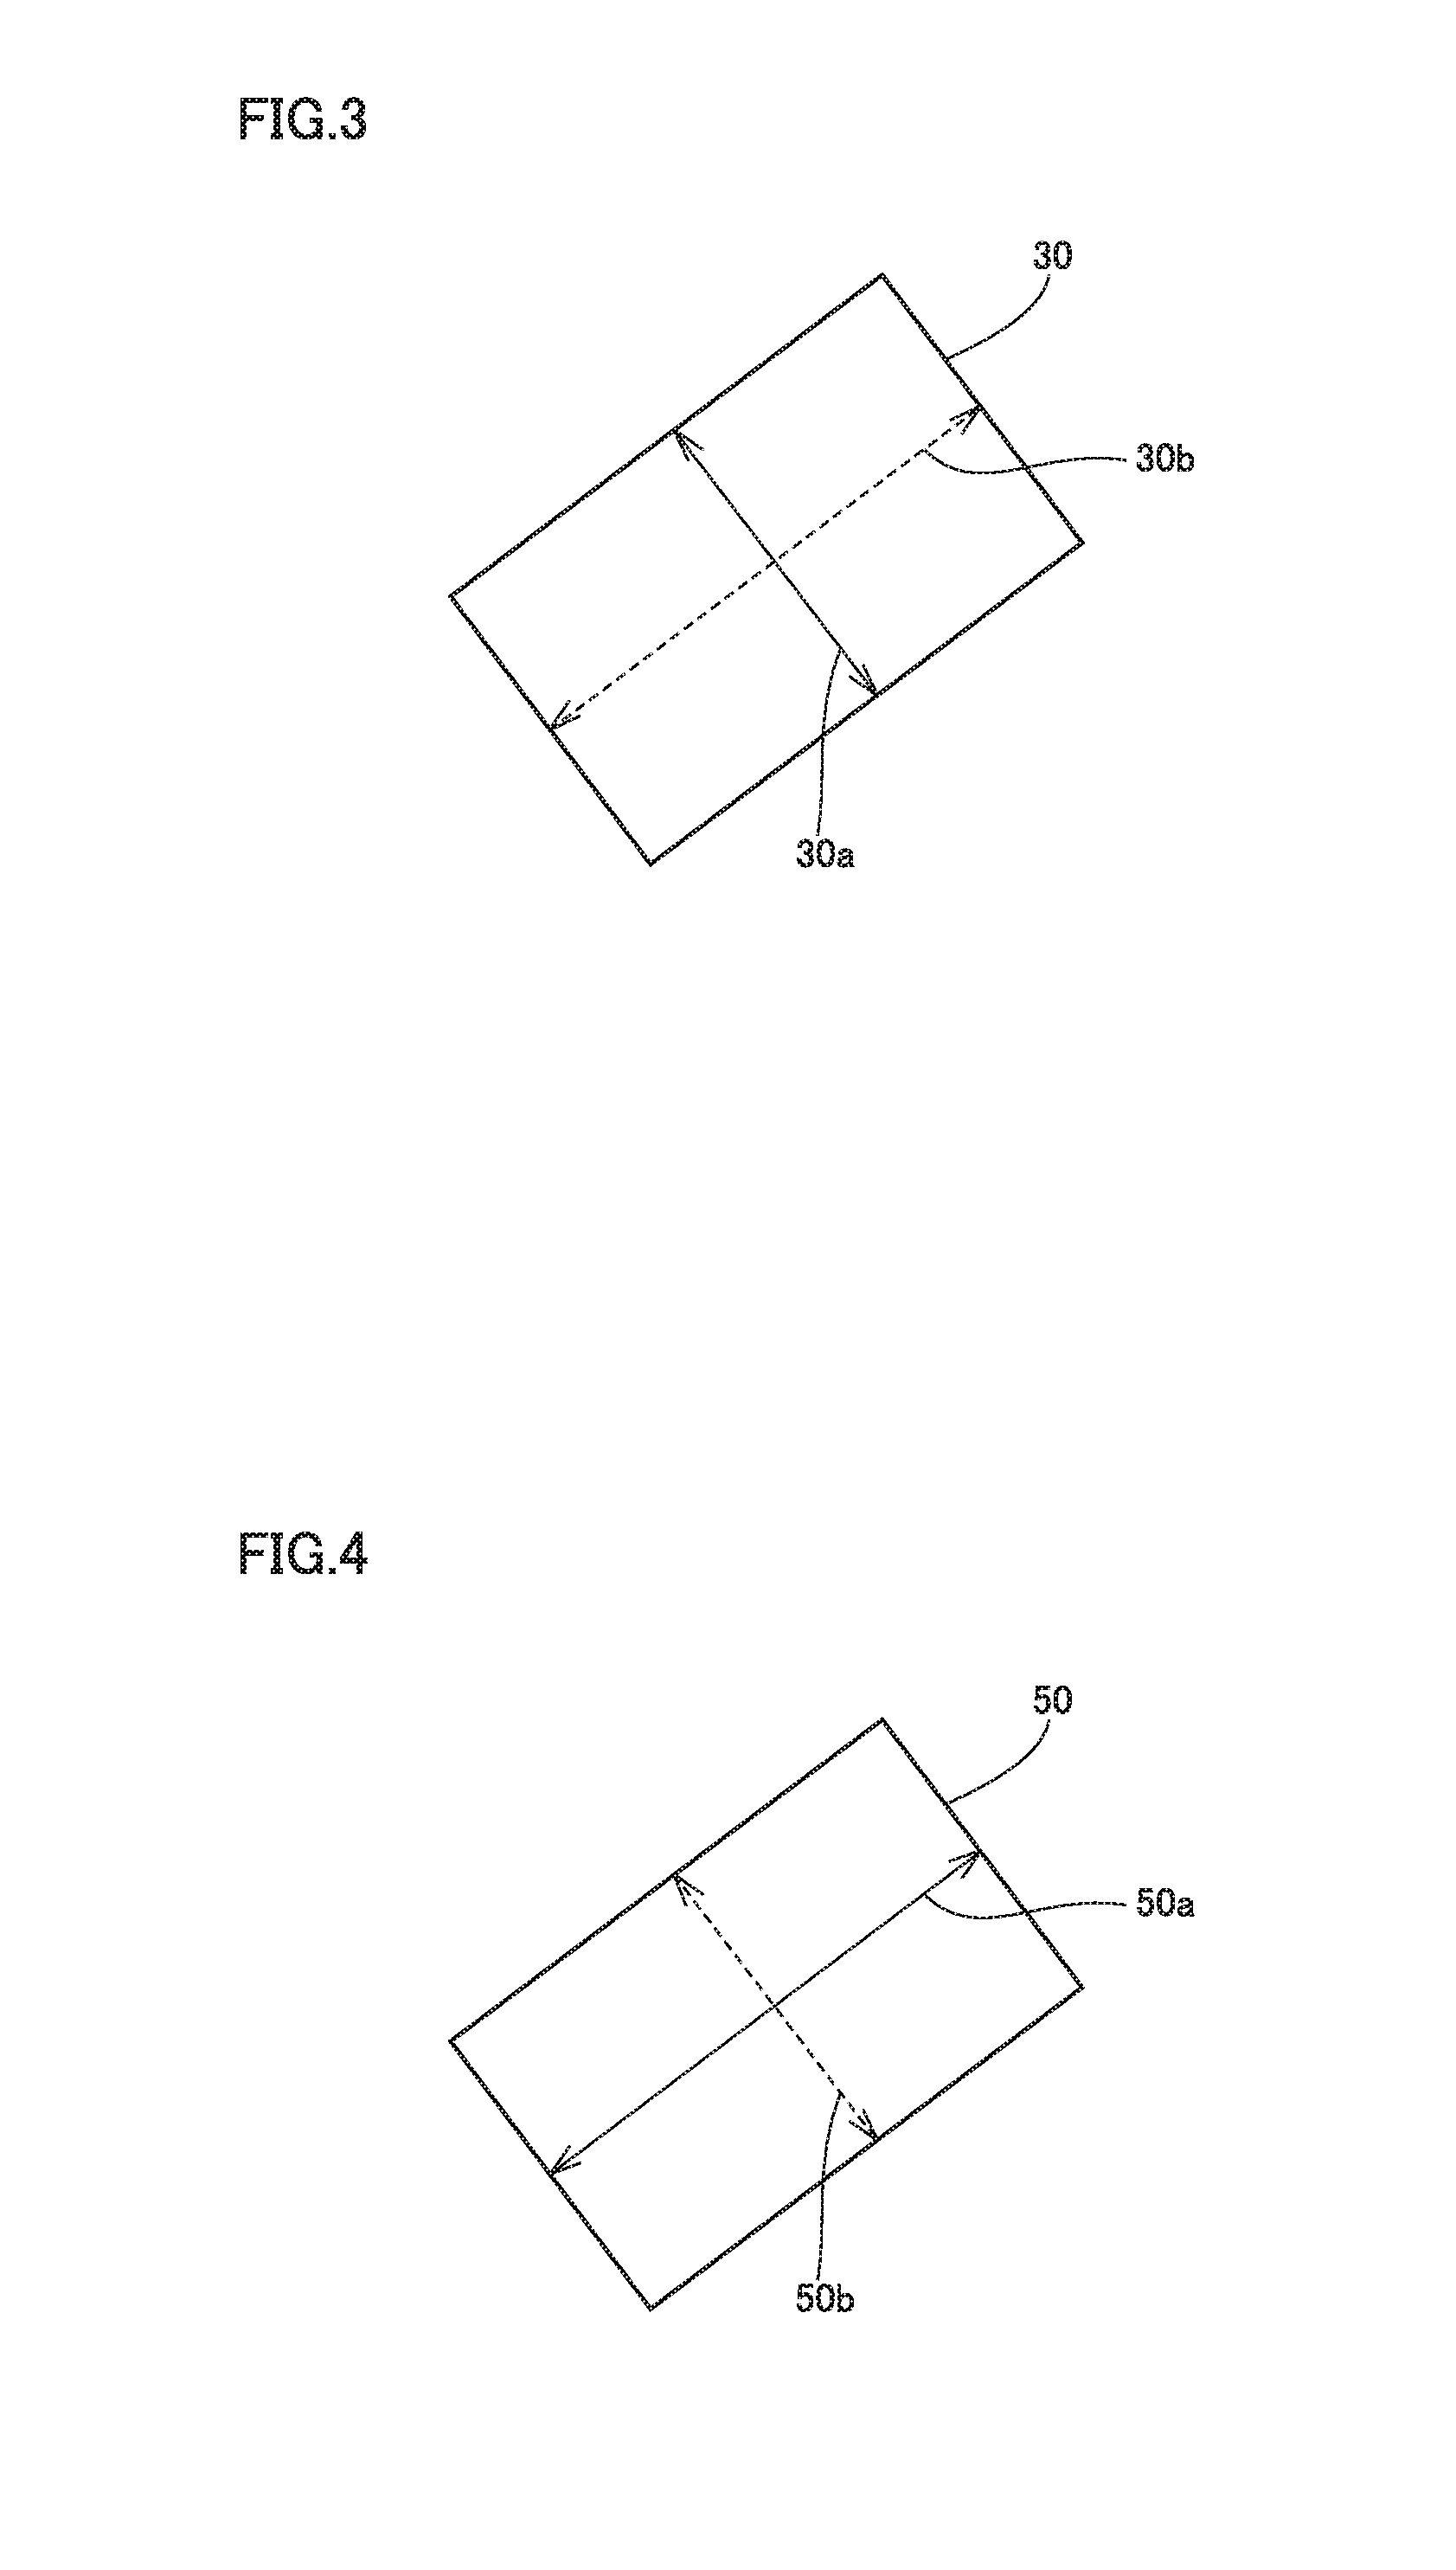 Set of polarizing plates and front-plate-integrated liquid crystal display panel